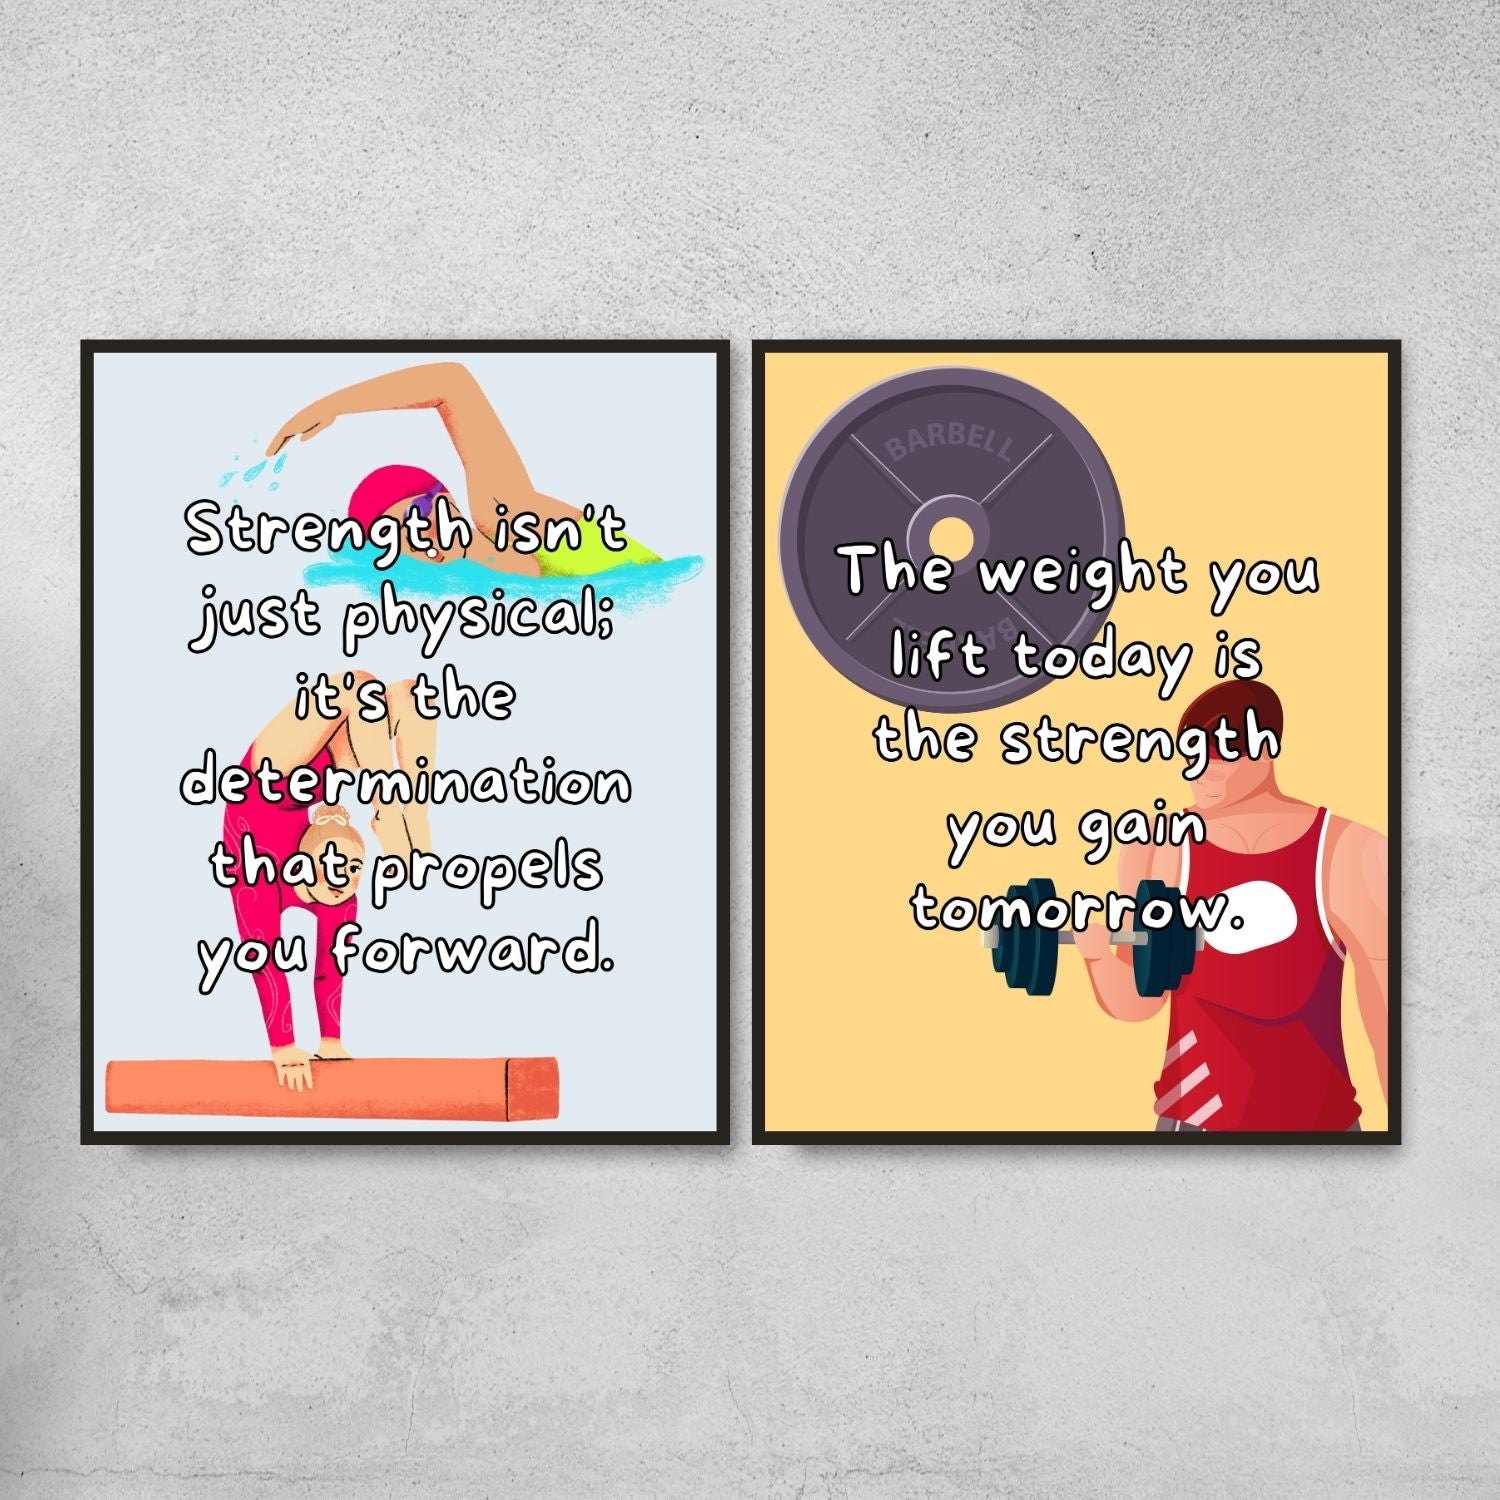 Quotes for Physical Education classroom decoration - Vol.1